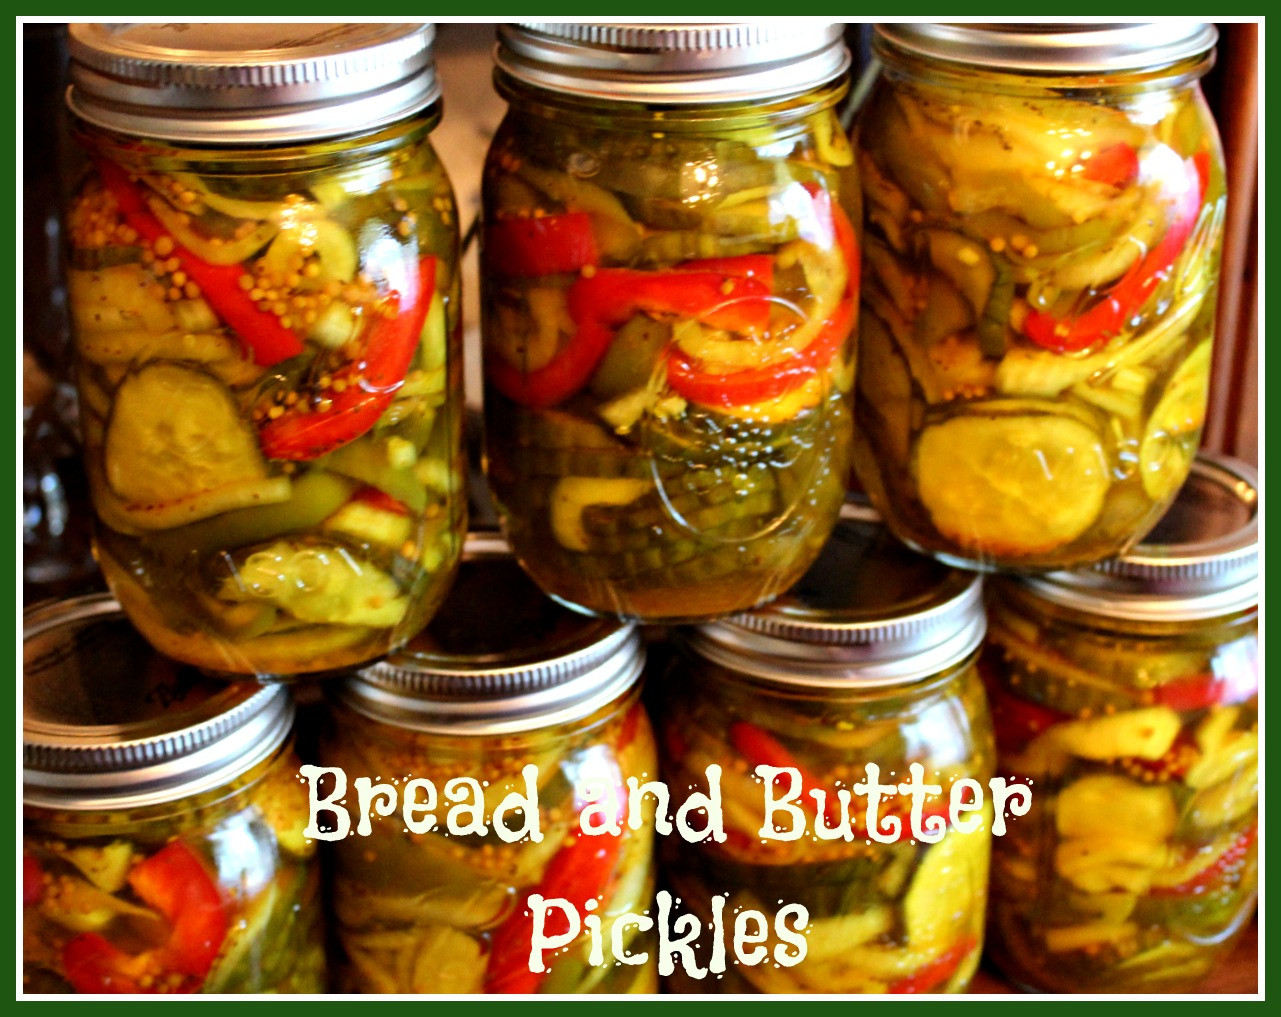 Bread And Butter Pickle Canning Recipe
 Sweet Tea and Cornbread Mama s Bread and Butter Pickles